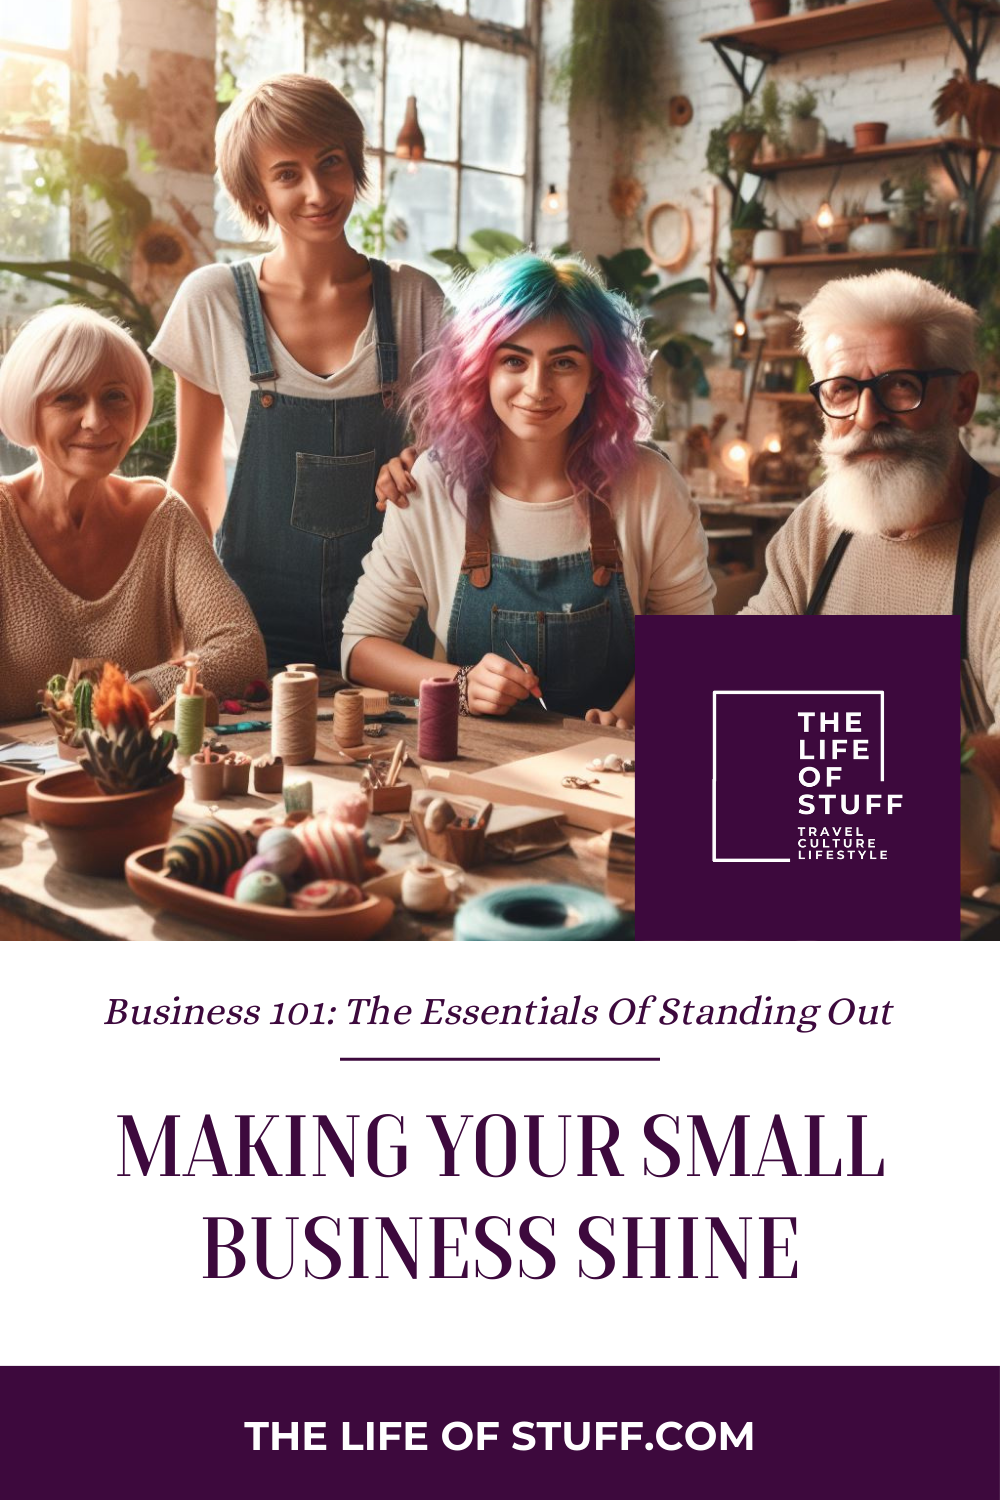 Making Your Small Business Shine - The Life of Stuff